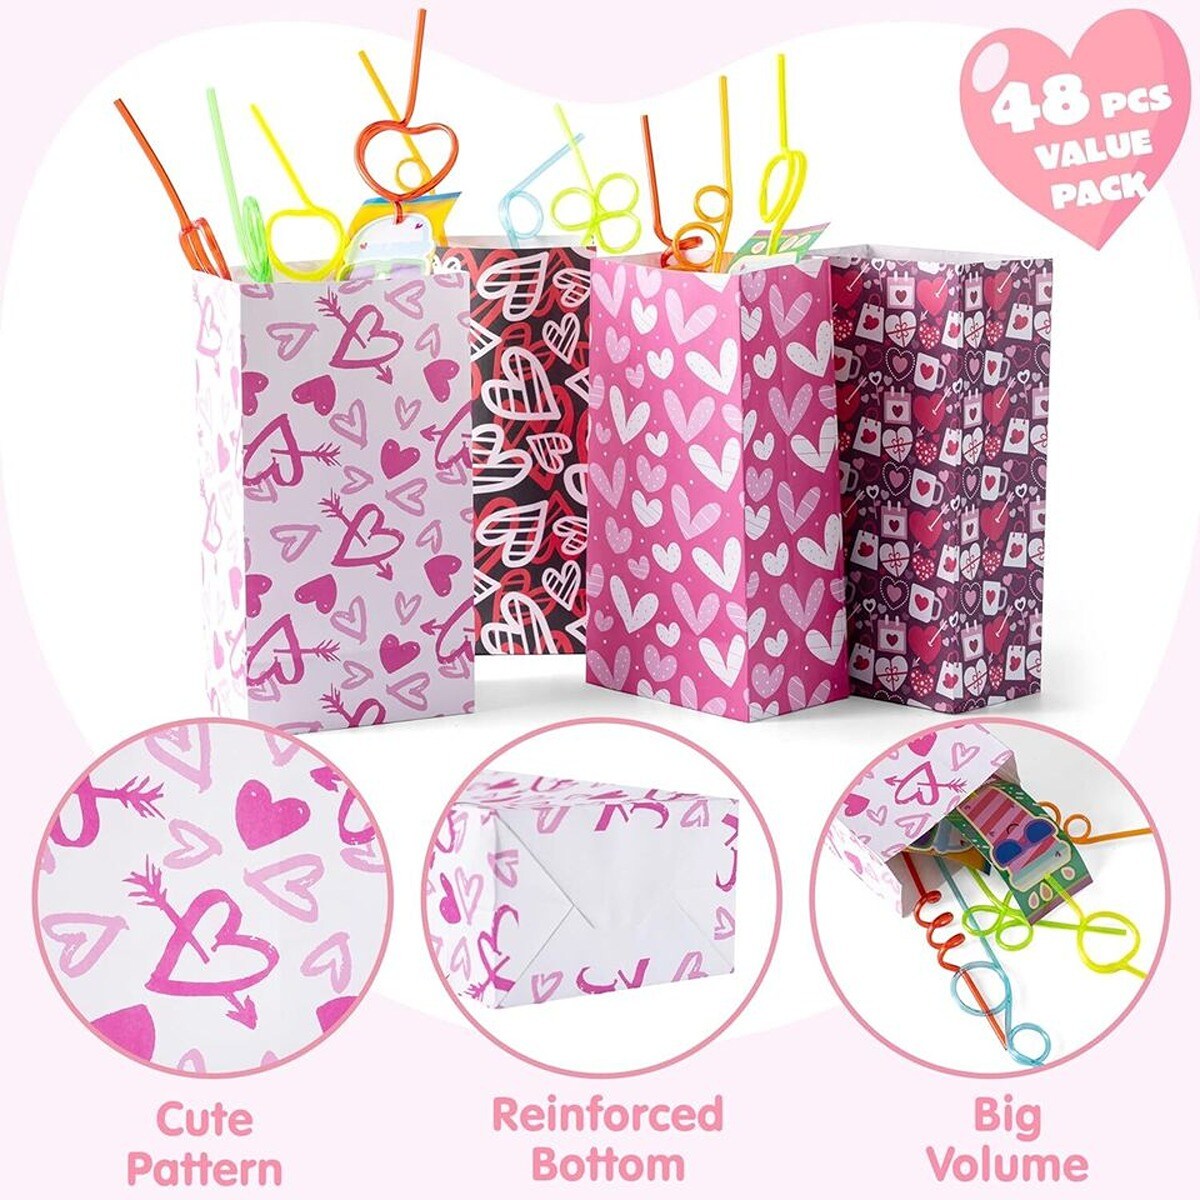 Durable Valentines Paper Gift Bags 48 pcs